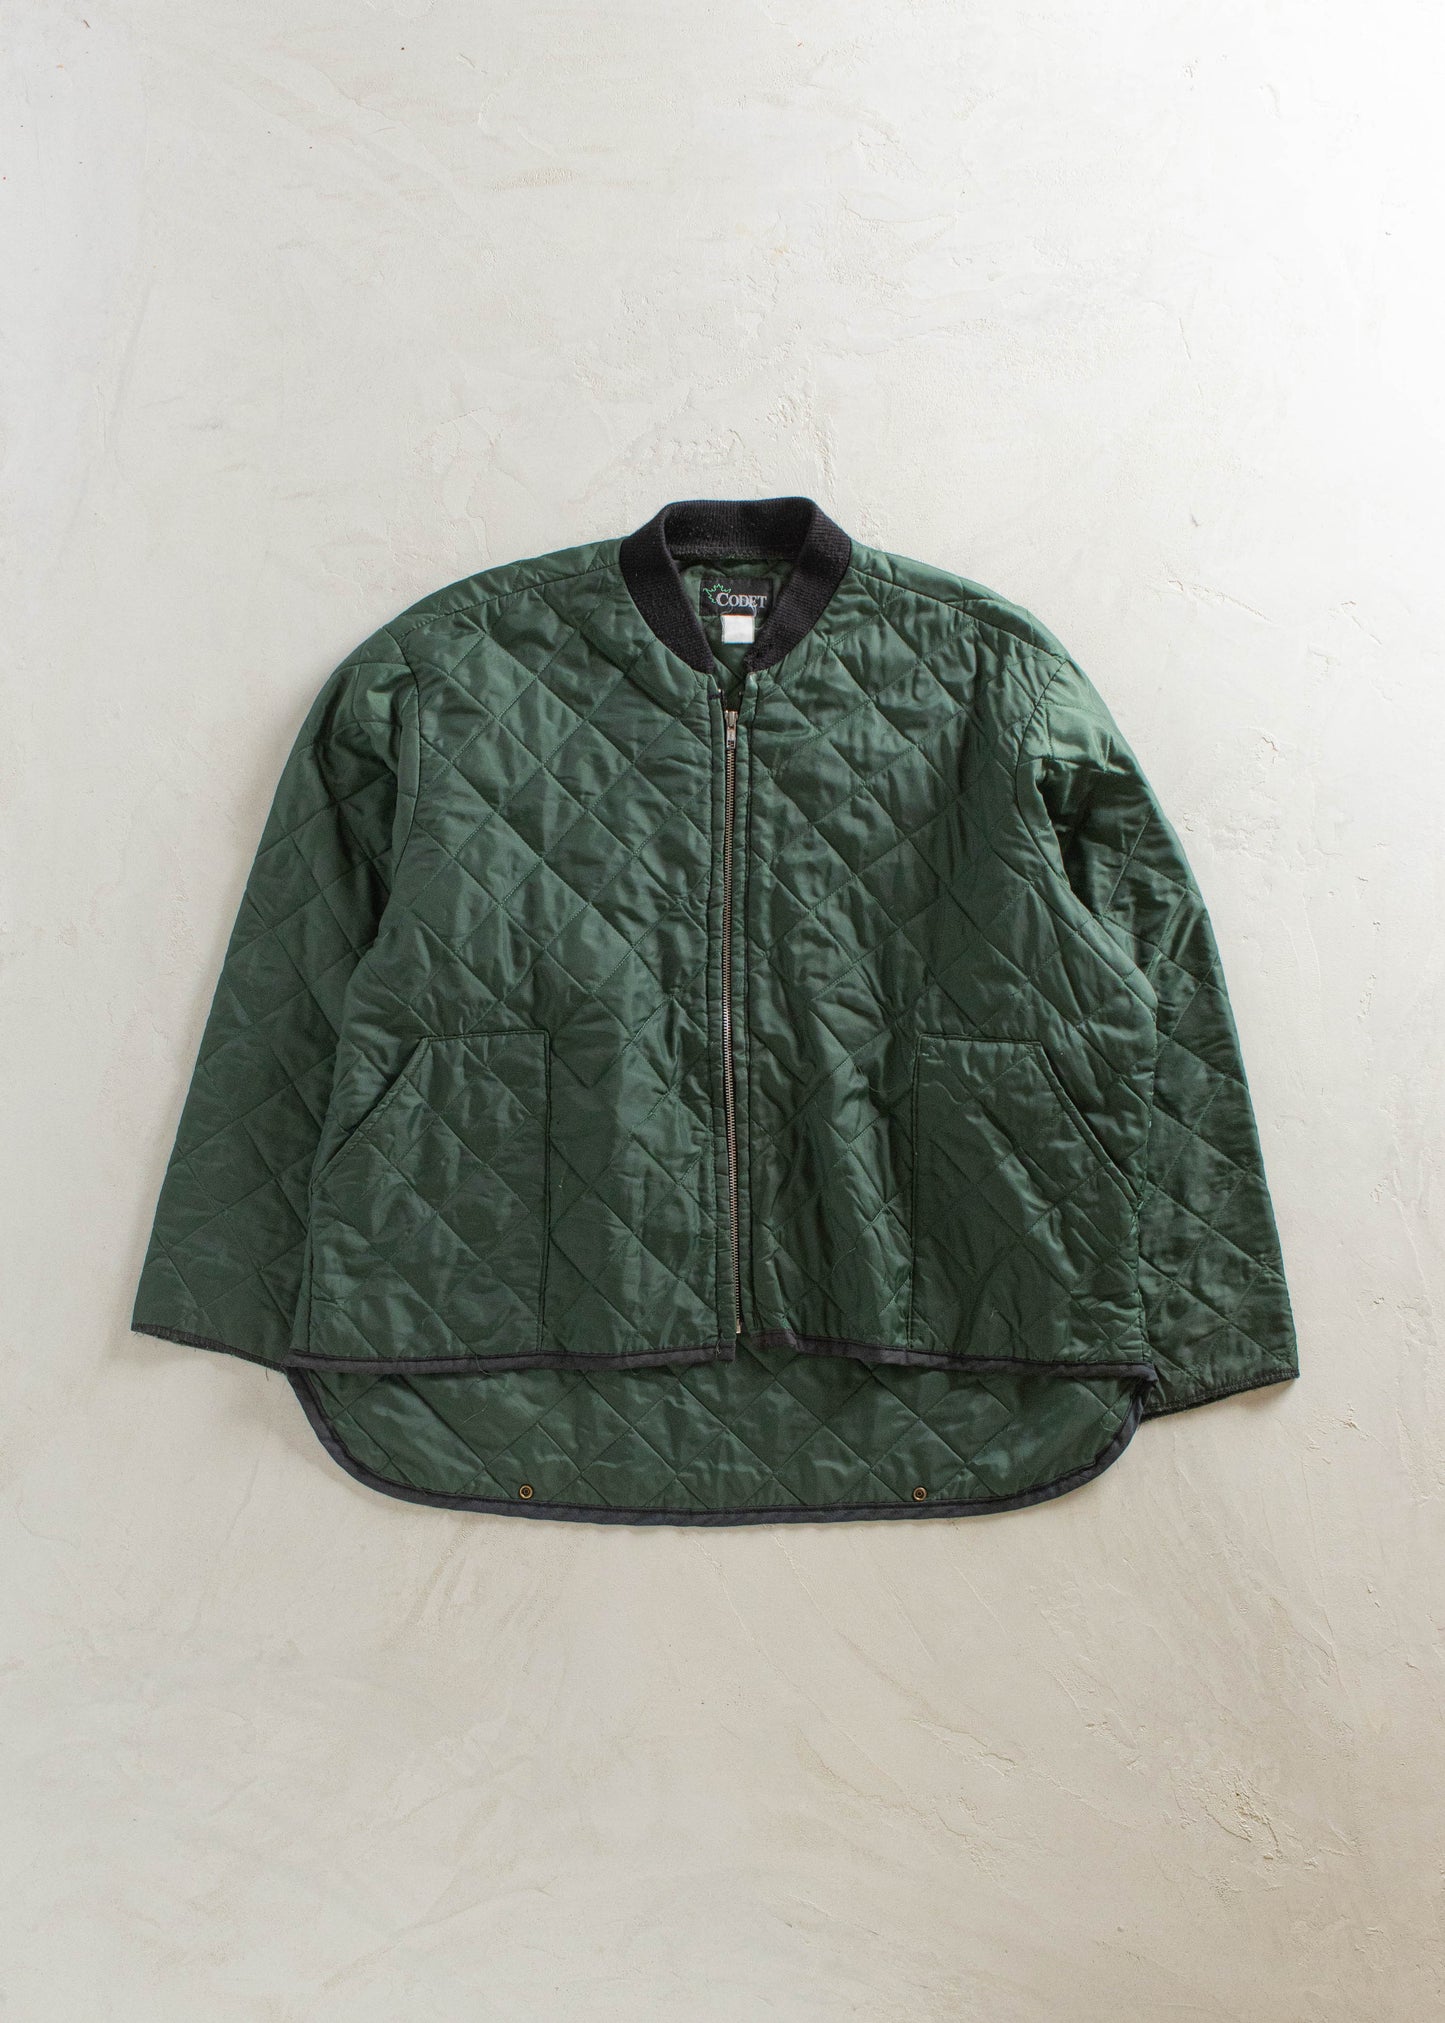 1980s Codet Quilted Nylon Jacket Size 2XL/3XL